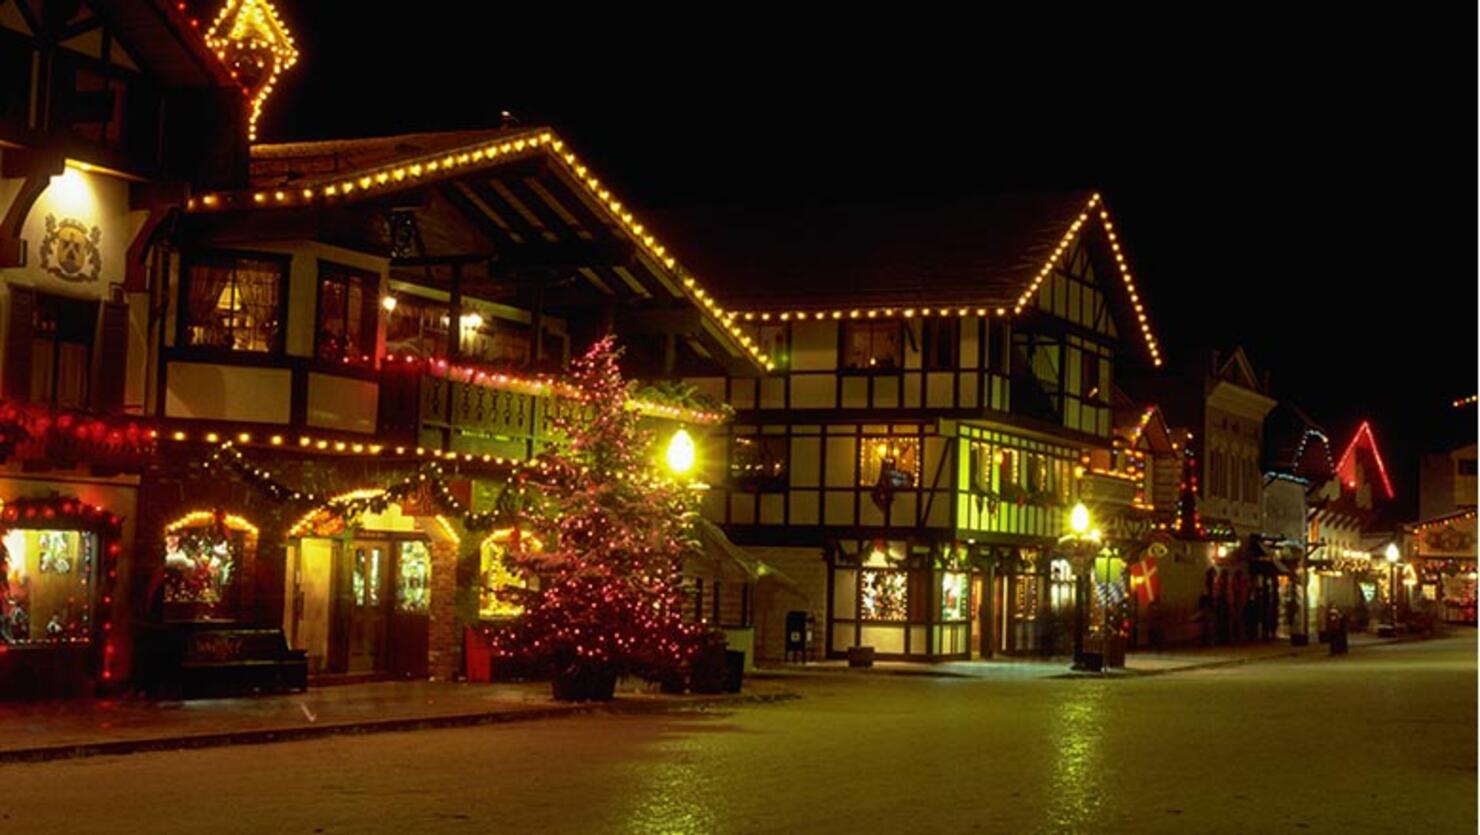 Swiss-style buildings which look like chalets, are lit up with colored lights at Christmastime in Leavenworth, Washington